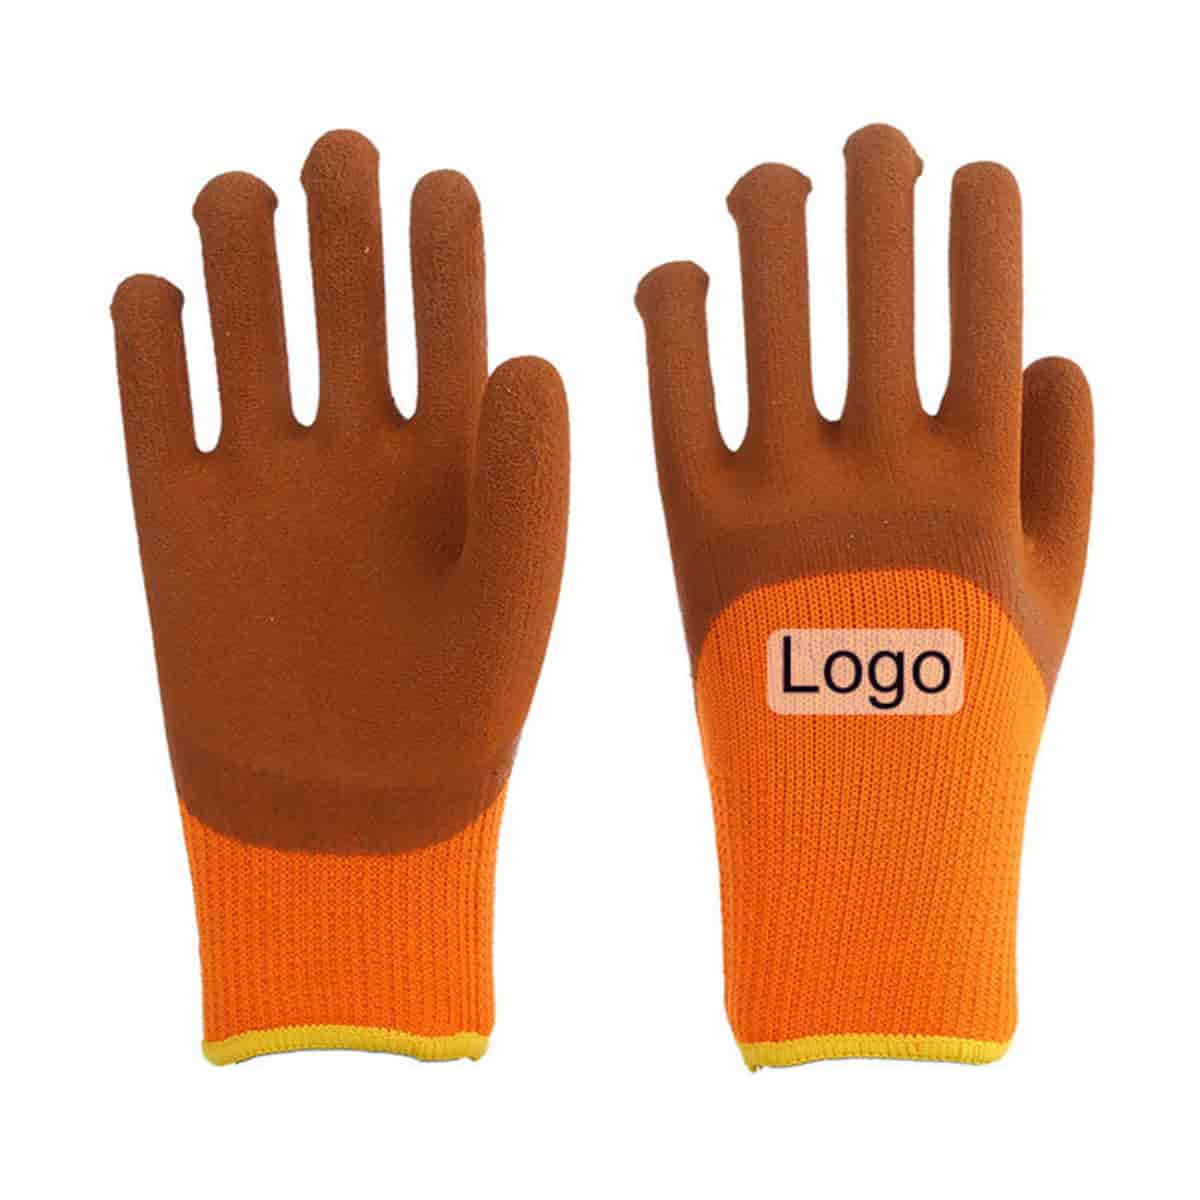 Anti Slip Crinkle Latex Coated Terry Knitted Gloves Winter Warm Construction Safety Thermal Work Gloves